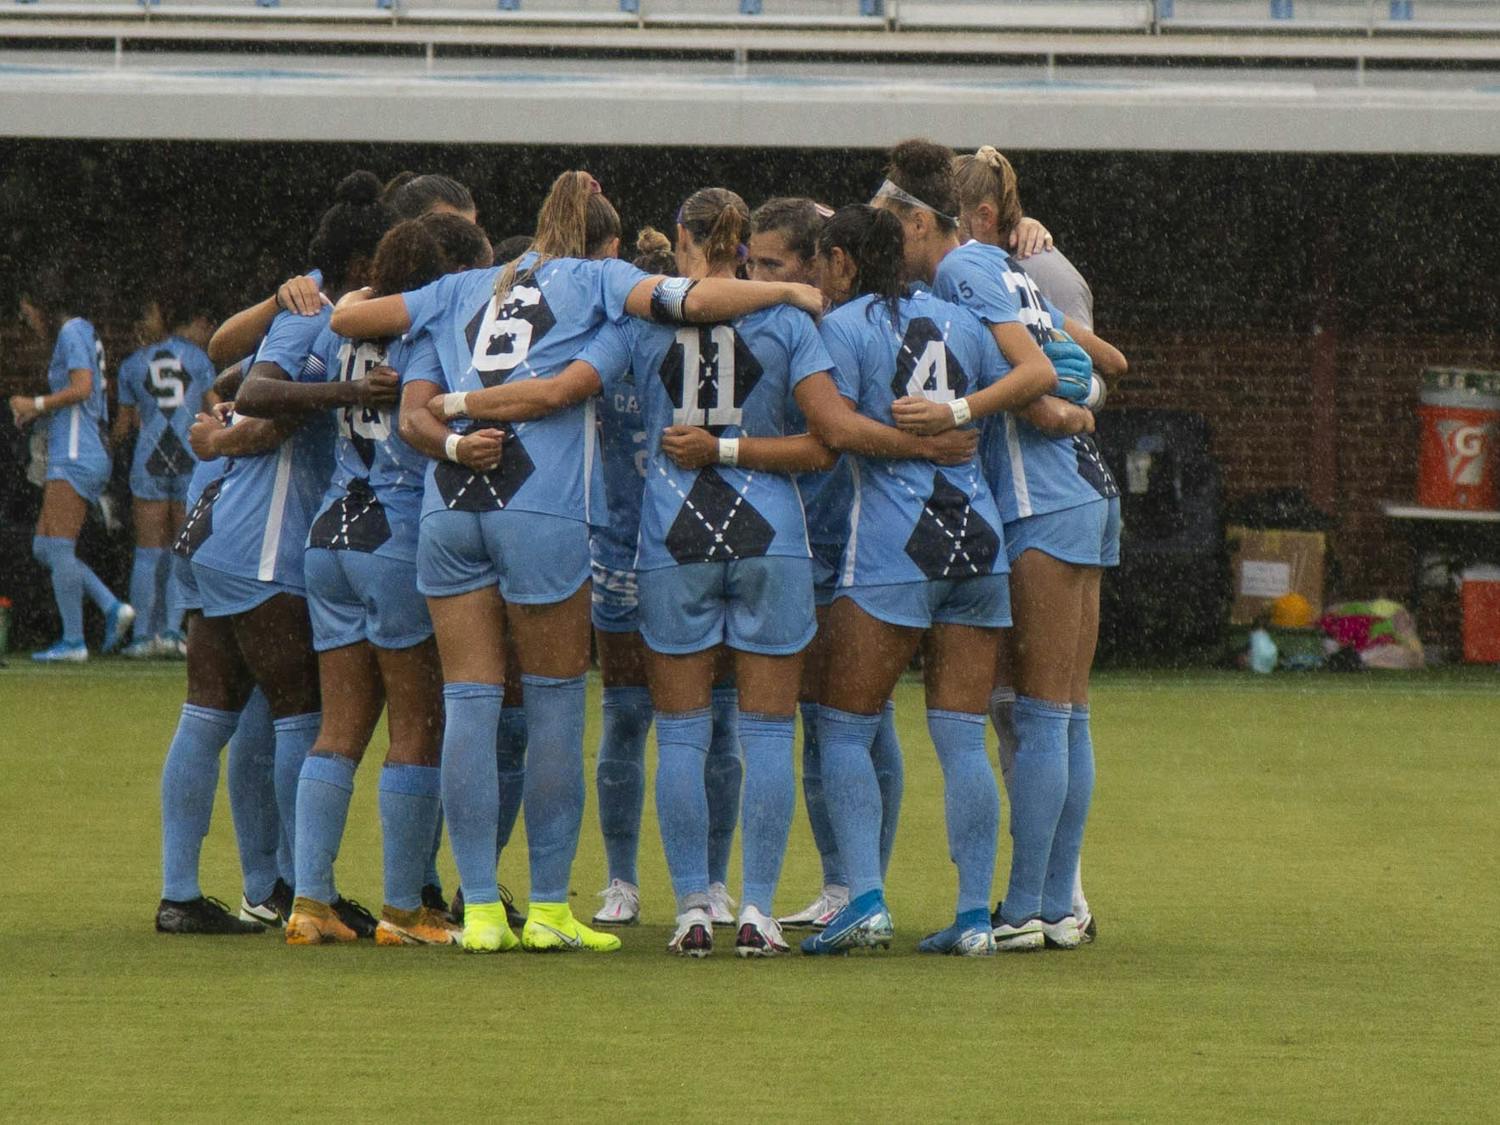 UNC women’s soccer team huddles before the start of their game against Wake Forest at Dorrence Field on Thursday, Sep. 17, 2020. UNC defeated Wake Forest with a final score of 4-1. Two of the goals were scored by junior forward Brianna Pinto, number eight, and the other two by junior forward Rachel Jones, number 10.